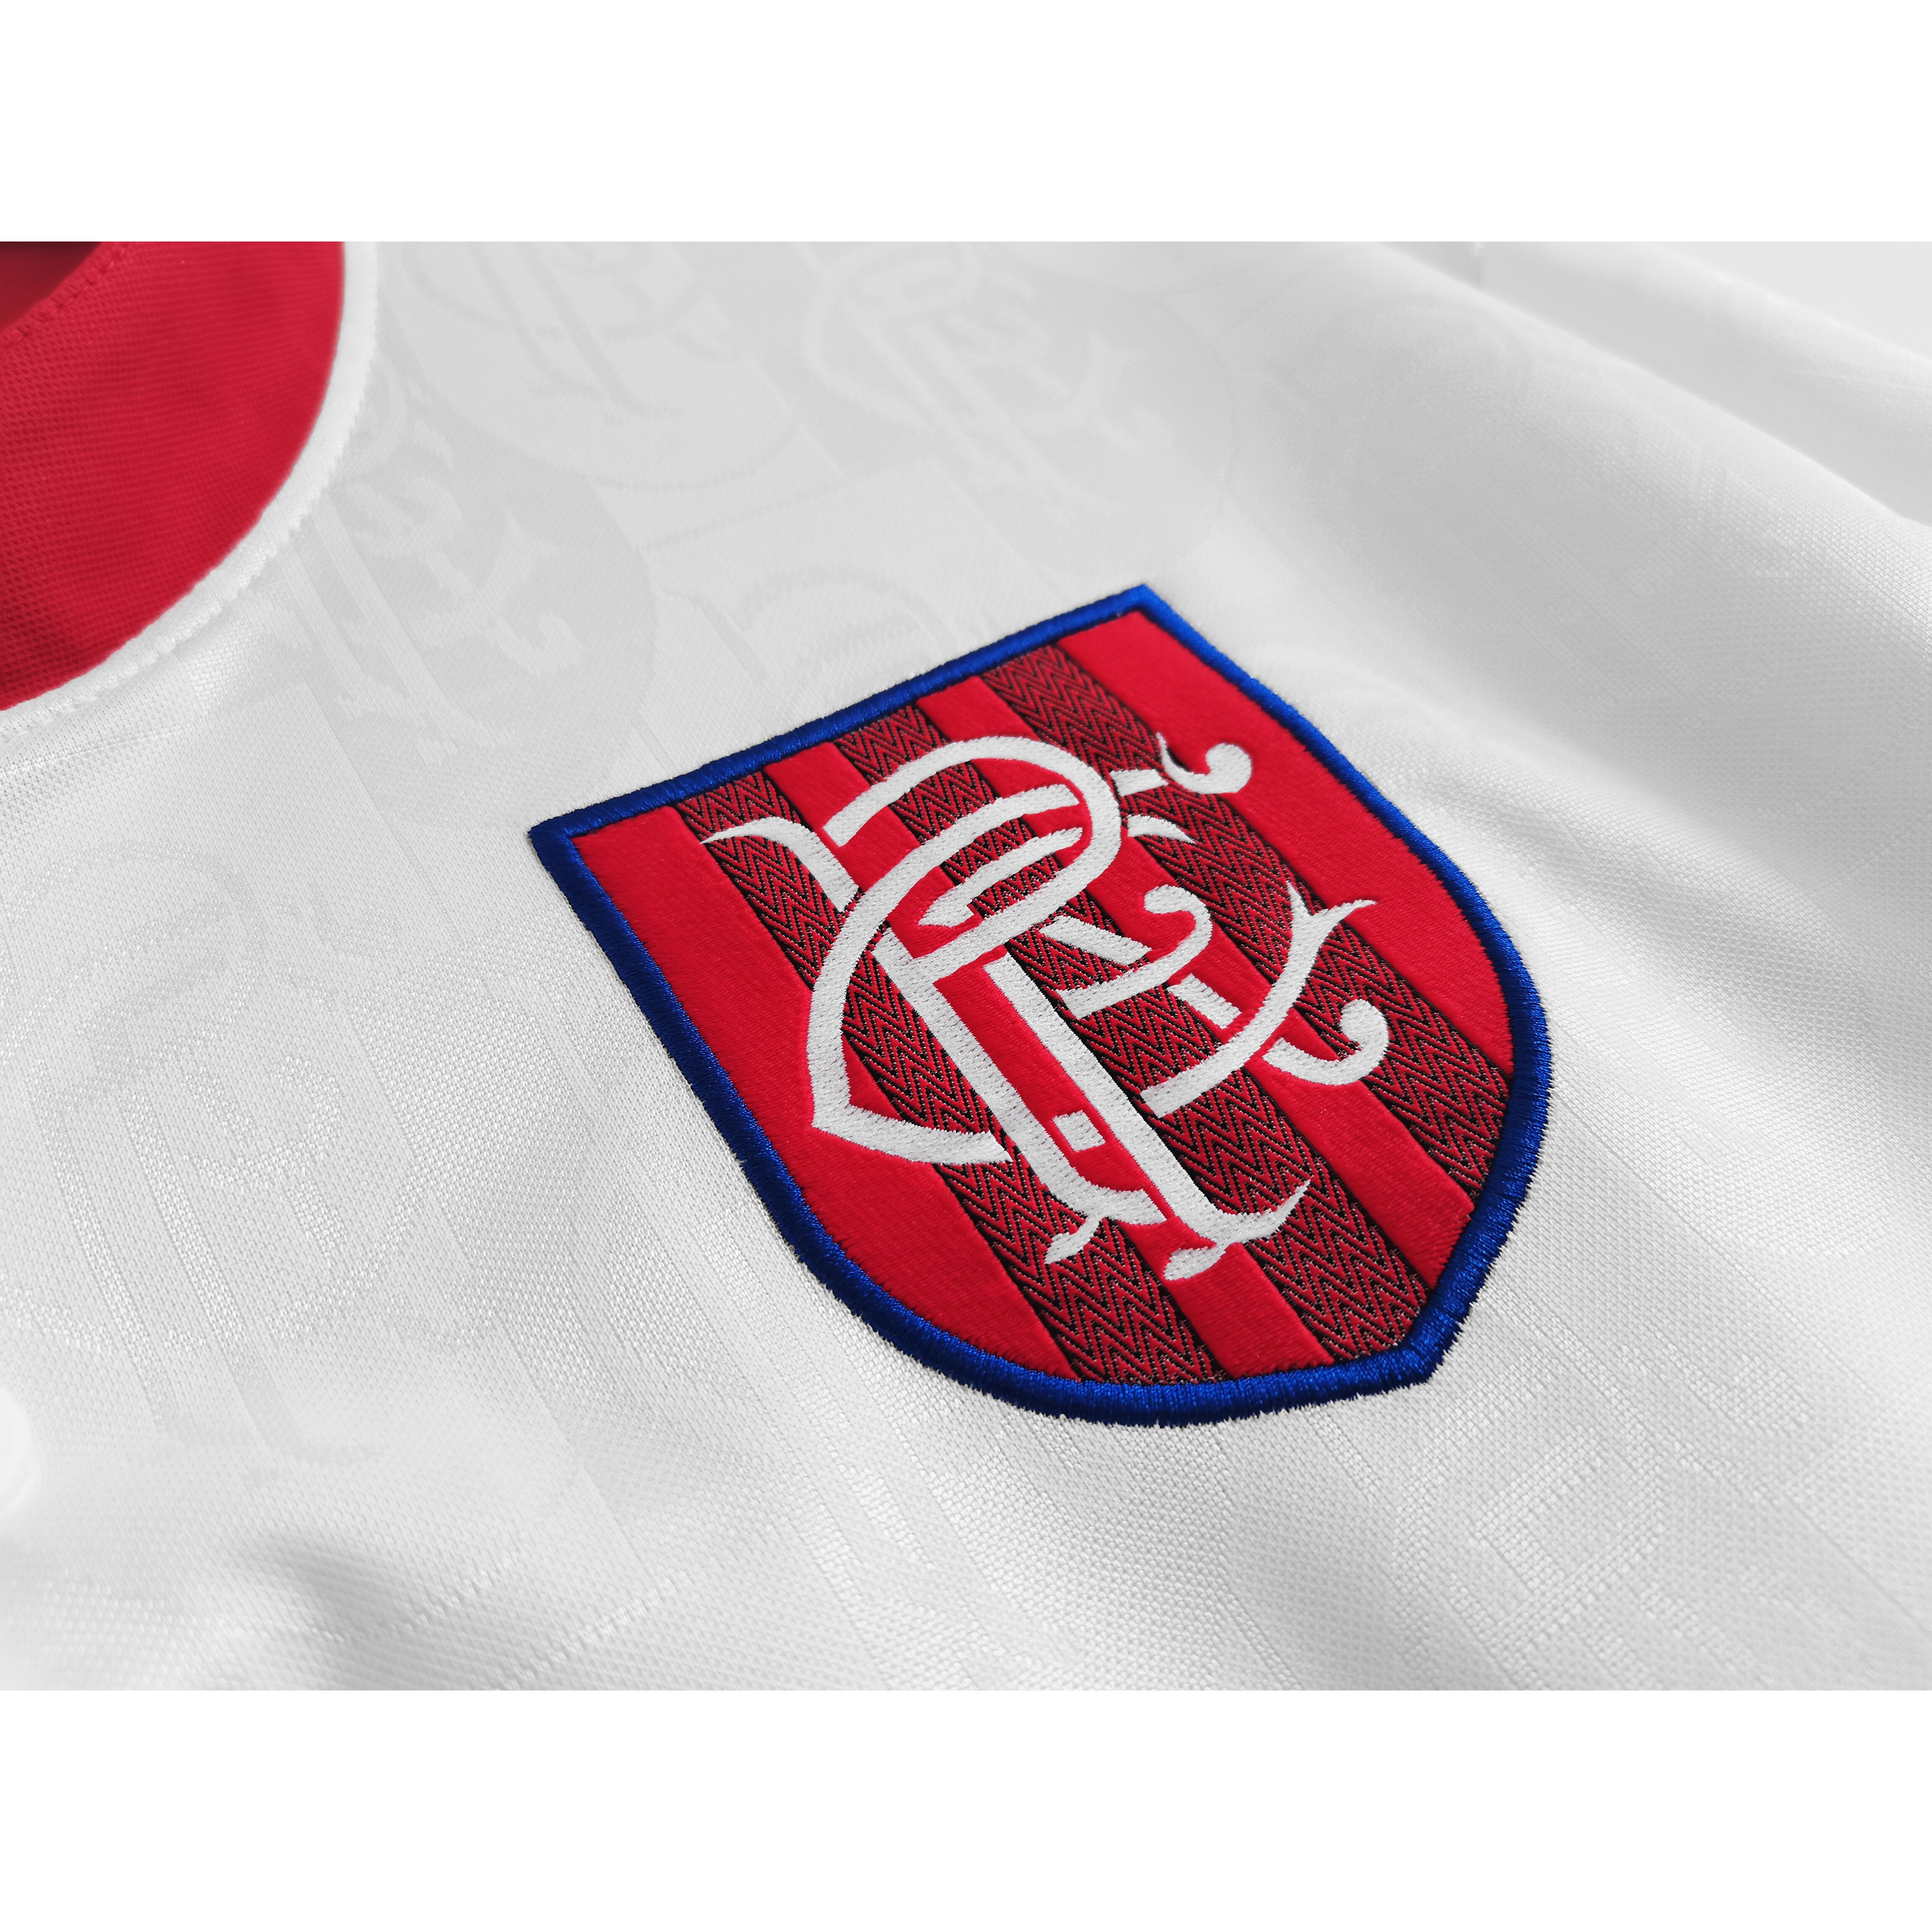 1996/97 Rangers Away Retro World Cup Soccer Jersey White/Red